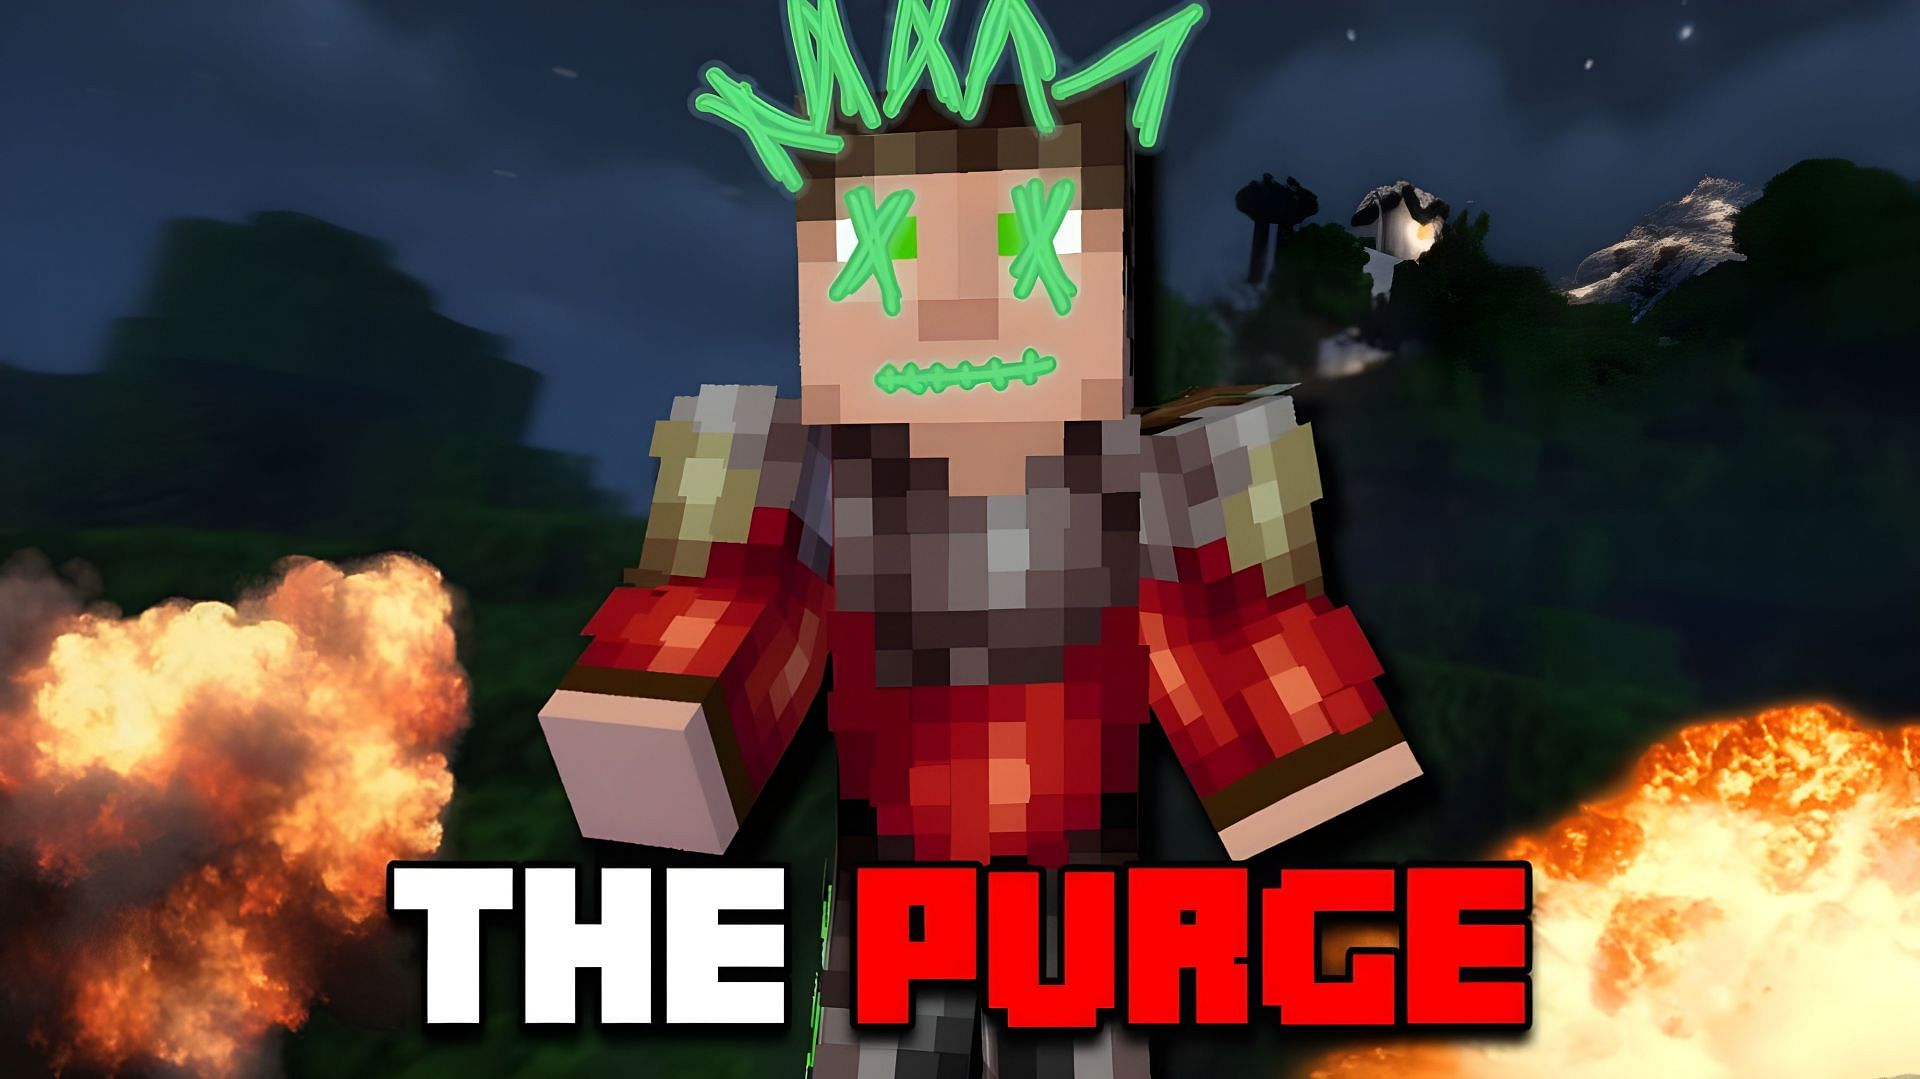 Recreating the Purge in Minecraft is truly crazy (Image via Youtube/Legundo)